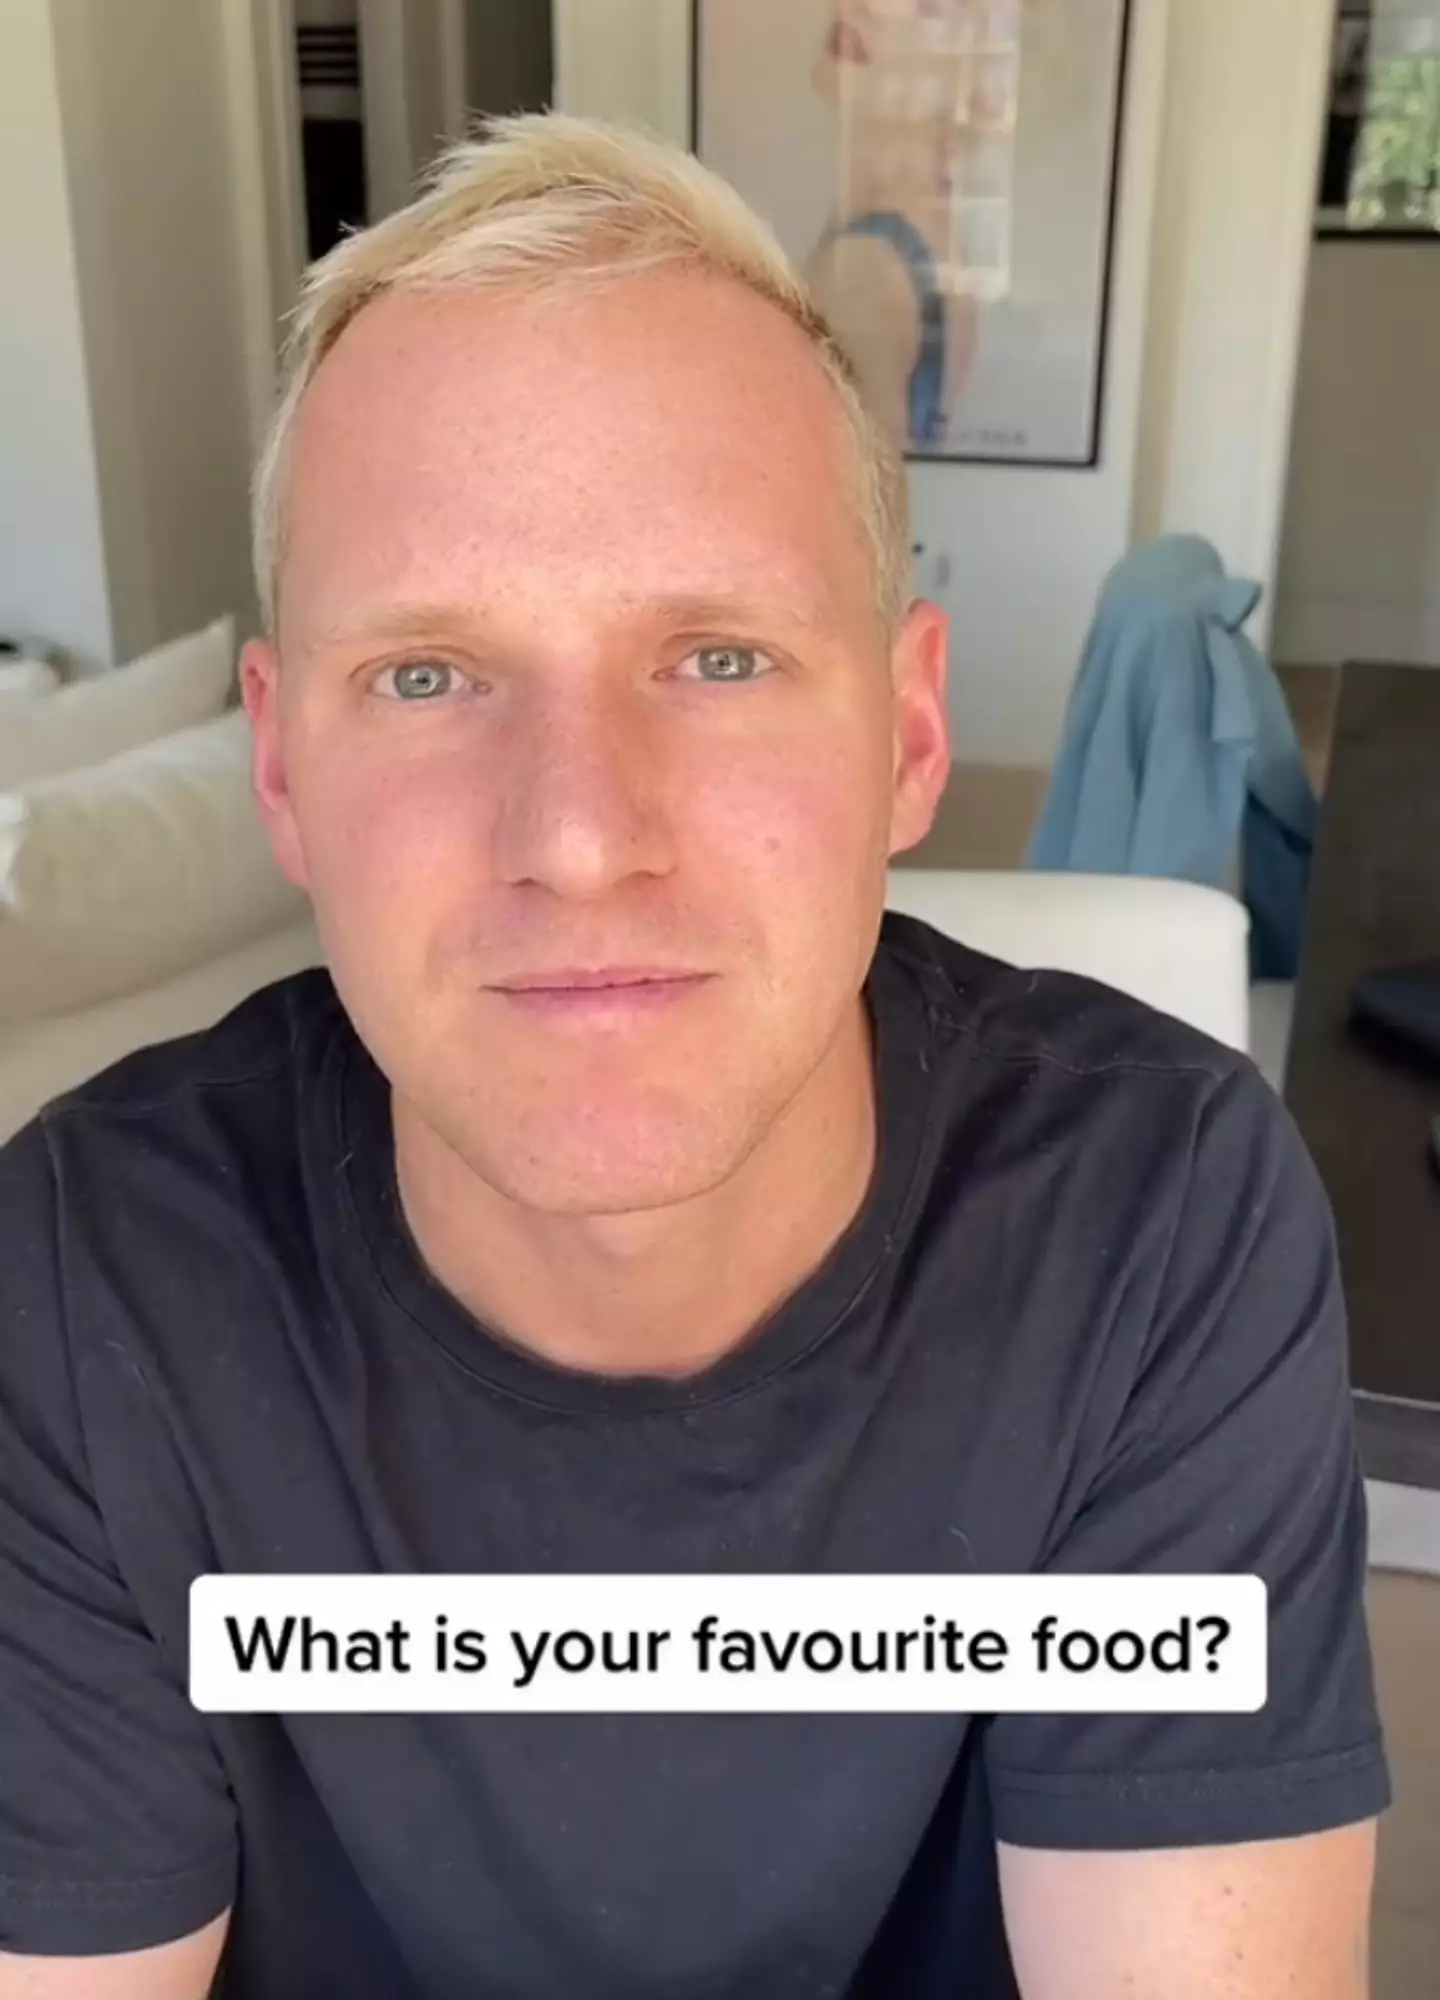 The test asks four questions about your favourite things.